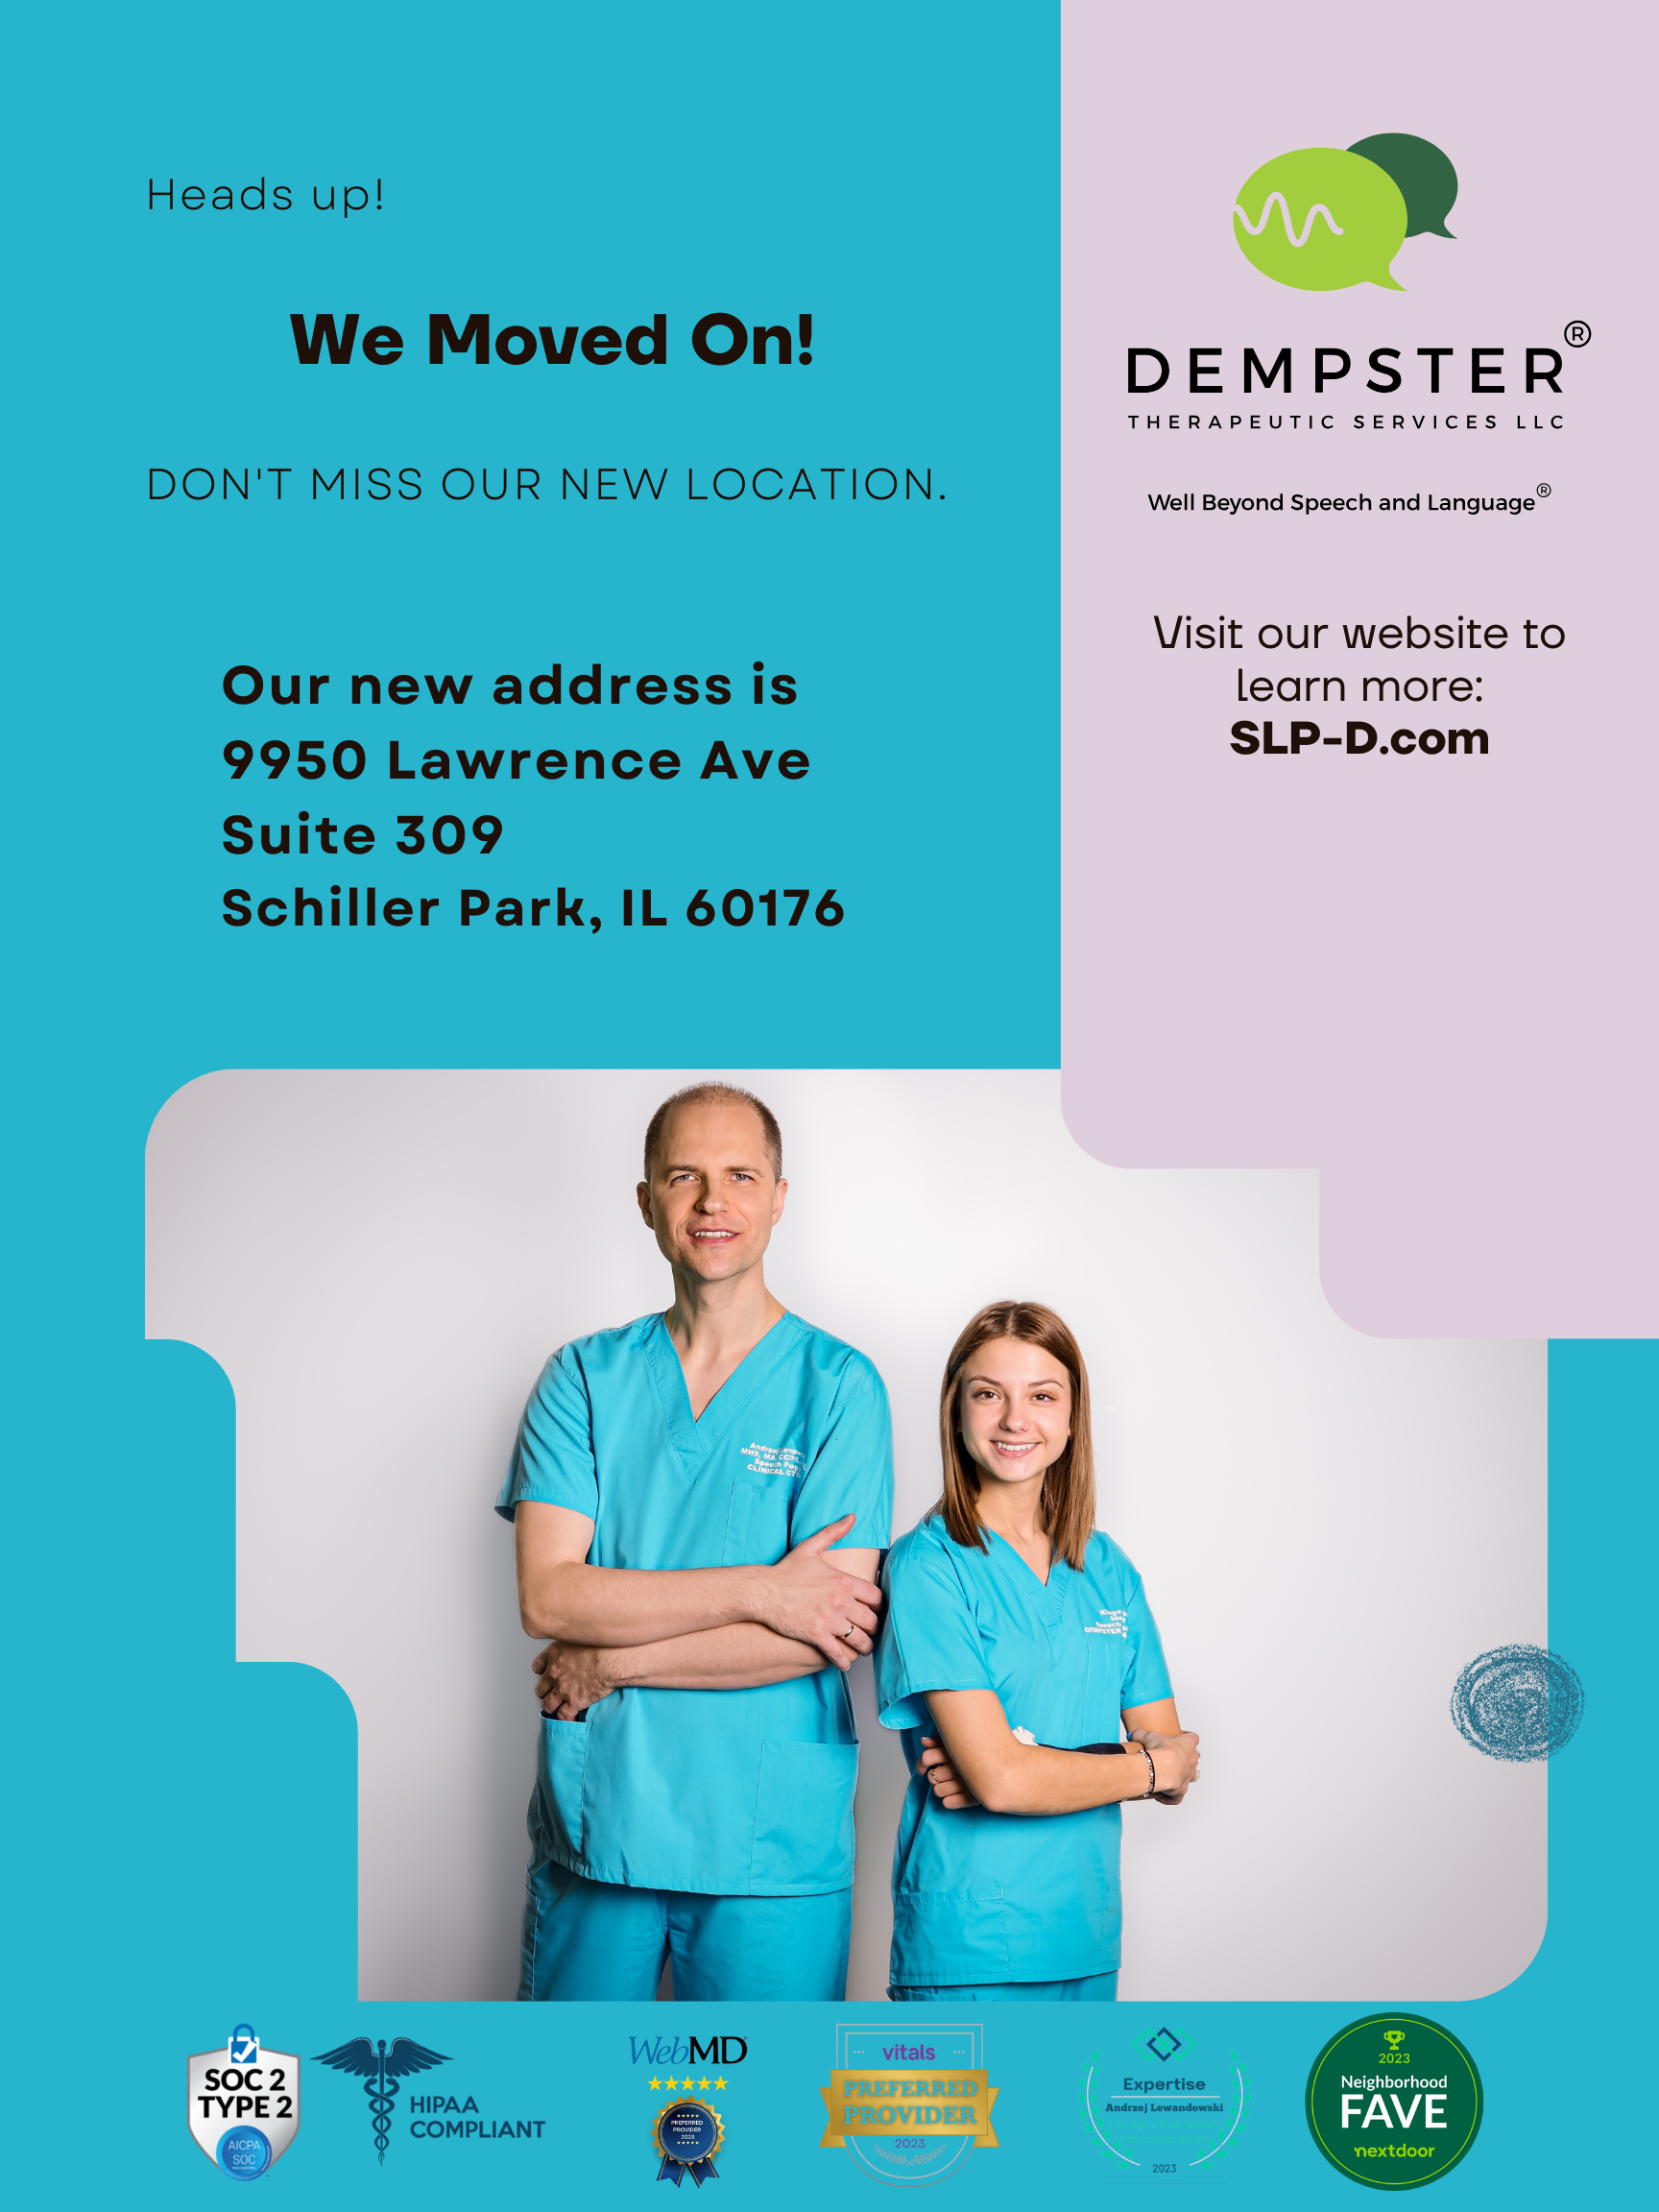 "Dempster Therapeutic Services"